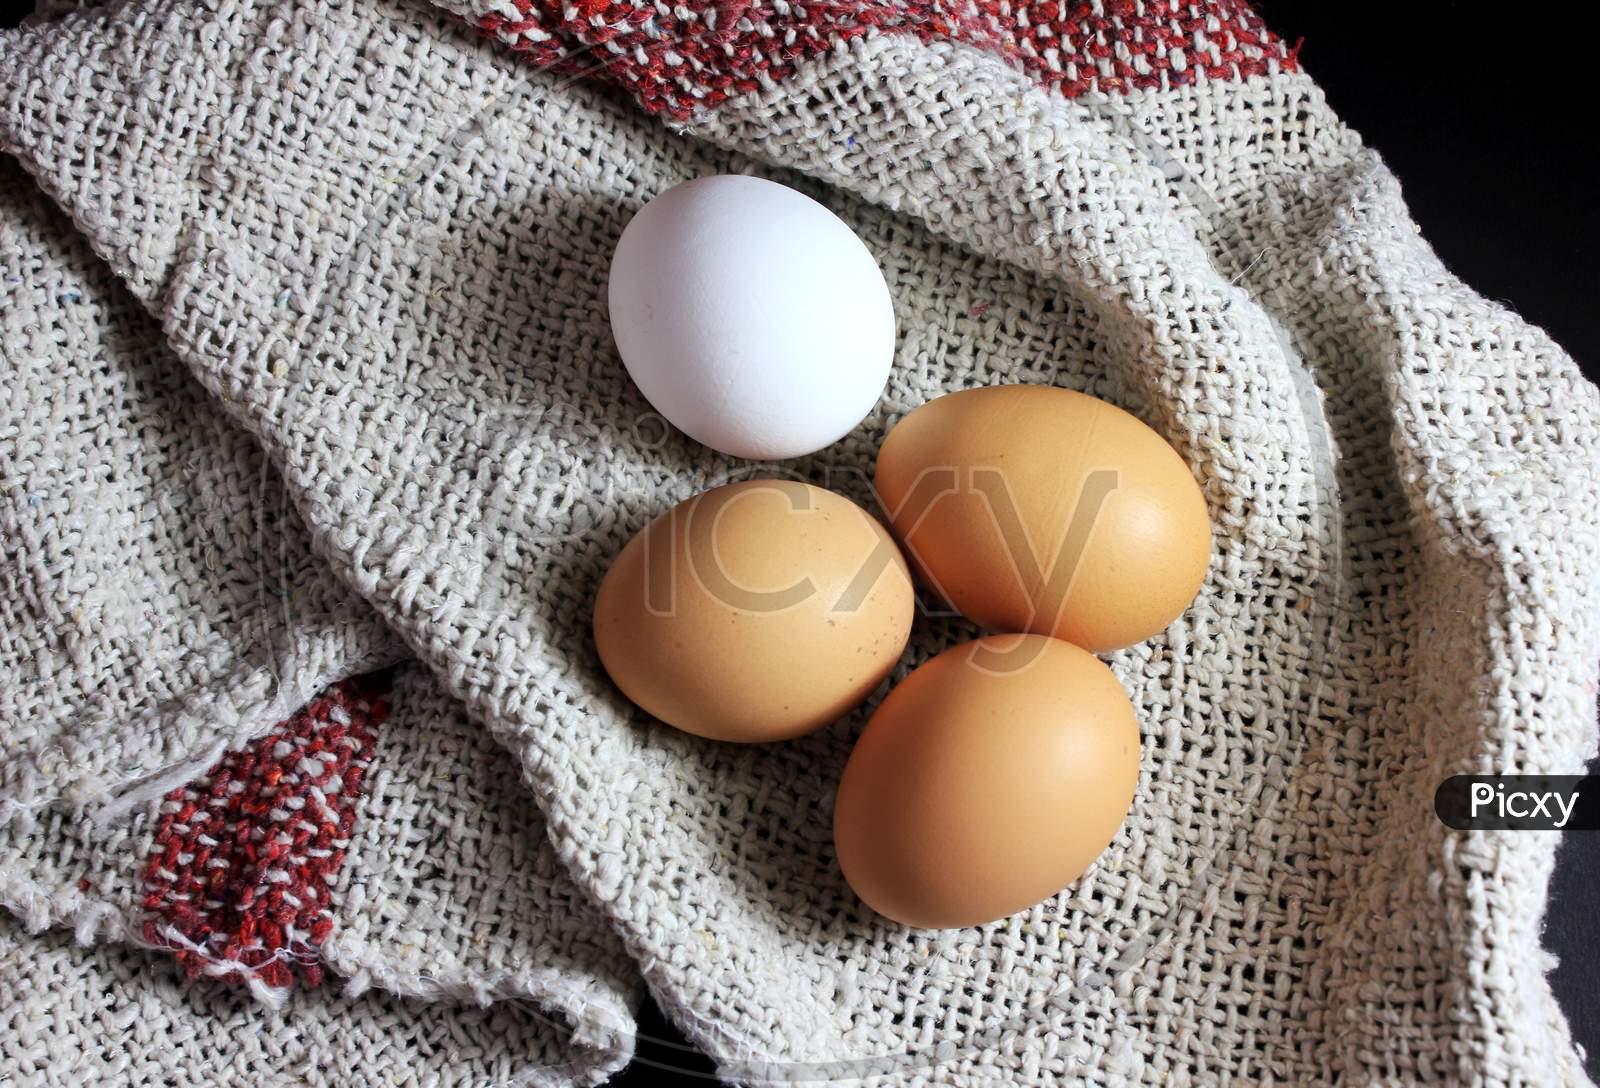 One White Egg And Three Brown Eggs